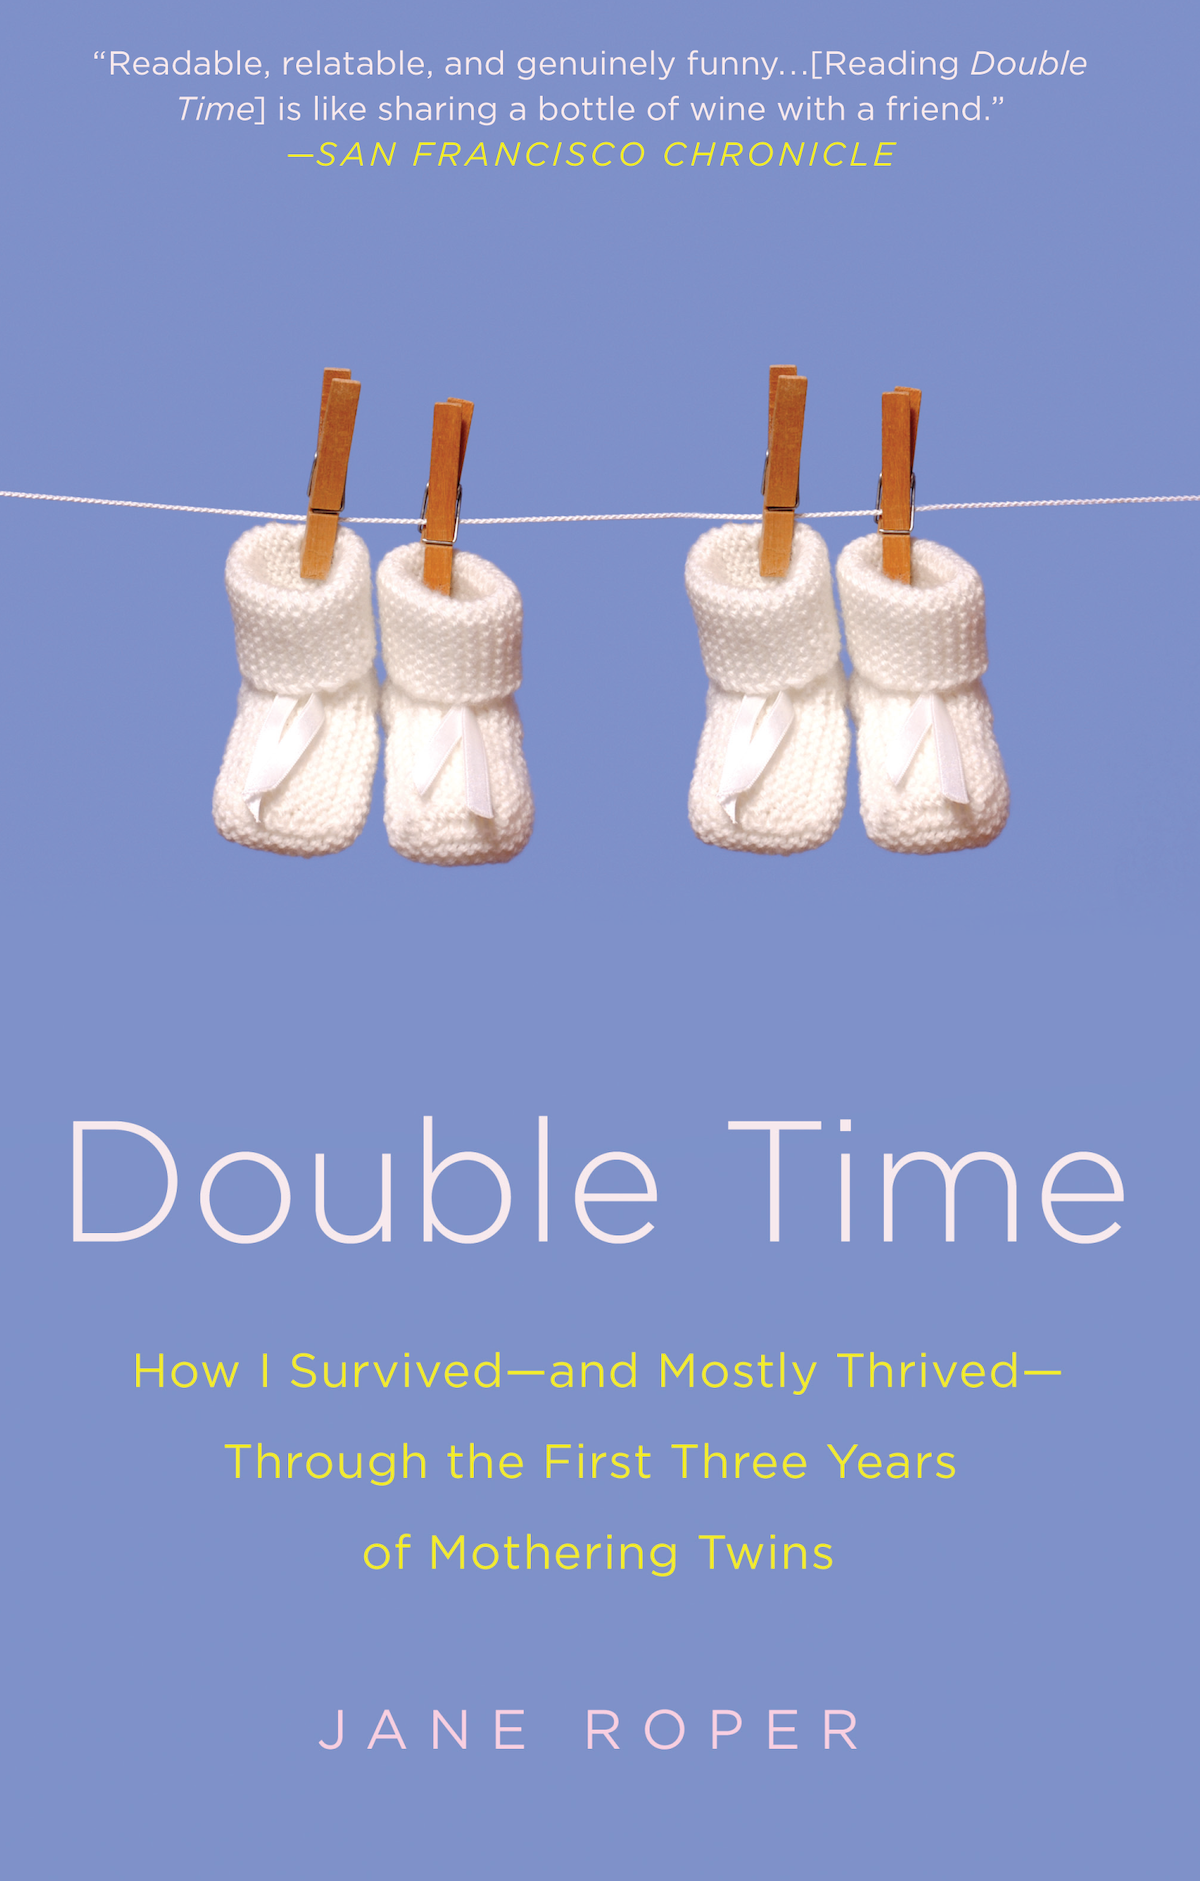 Cover of the memoir Double Time by Jane Roper